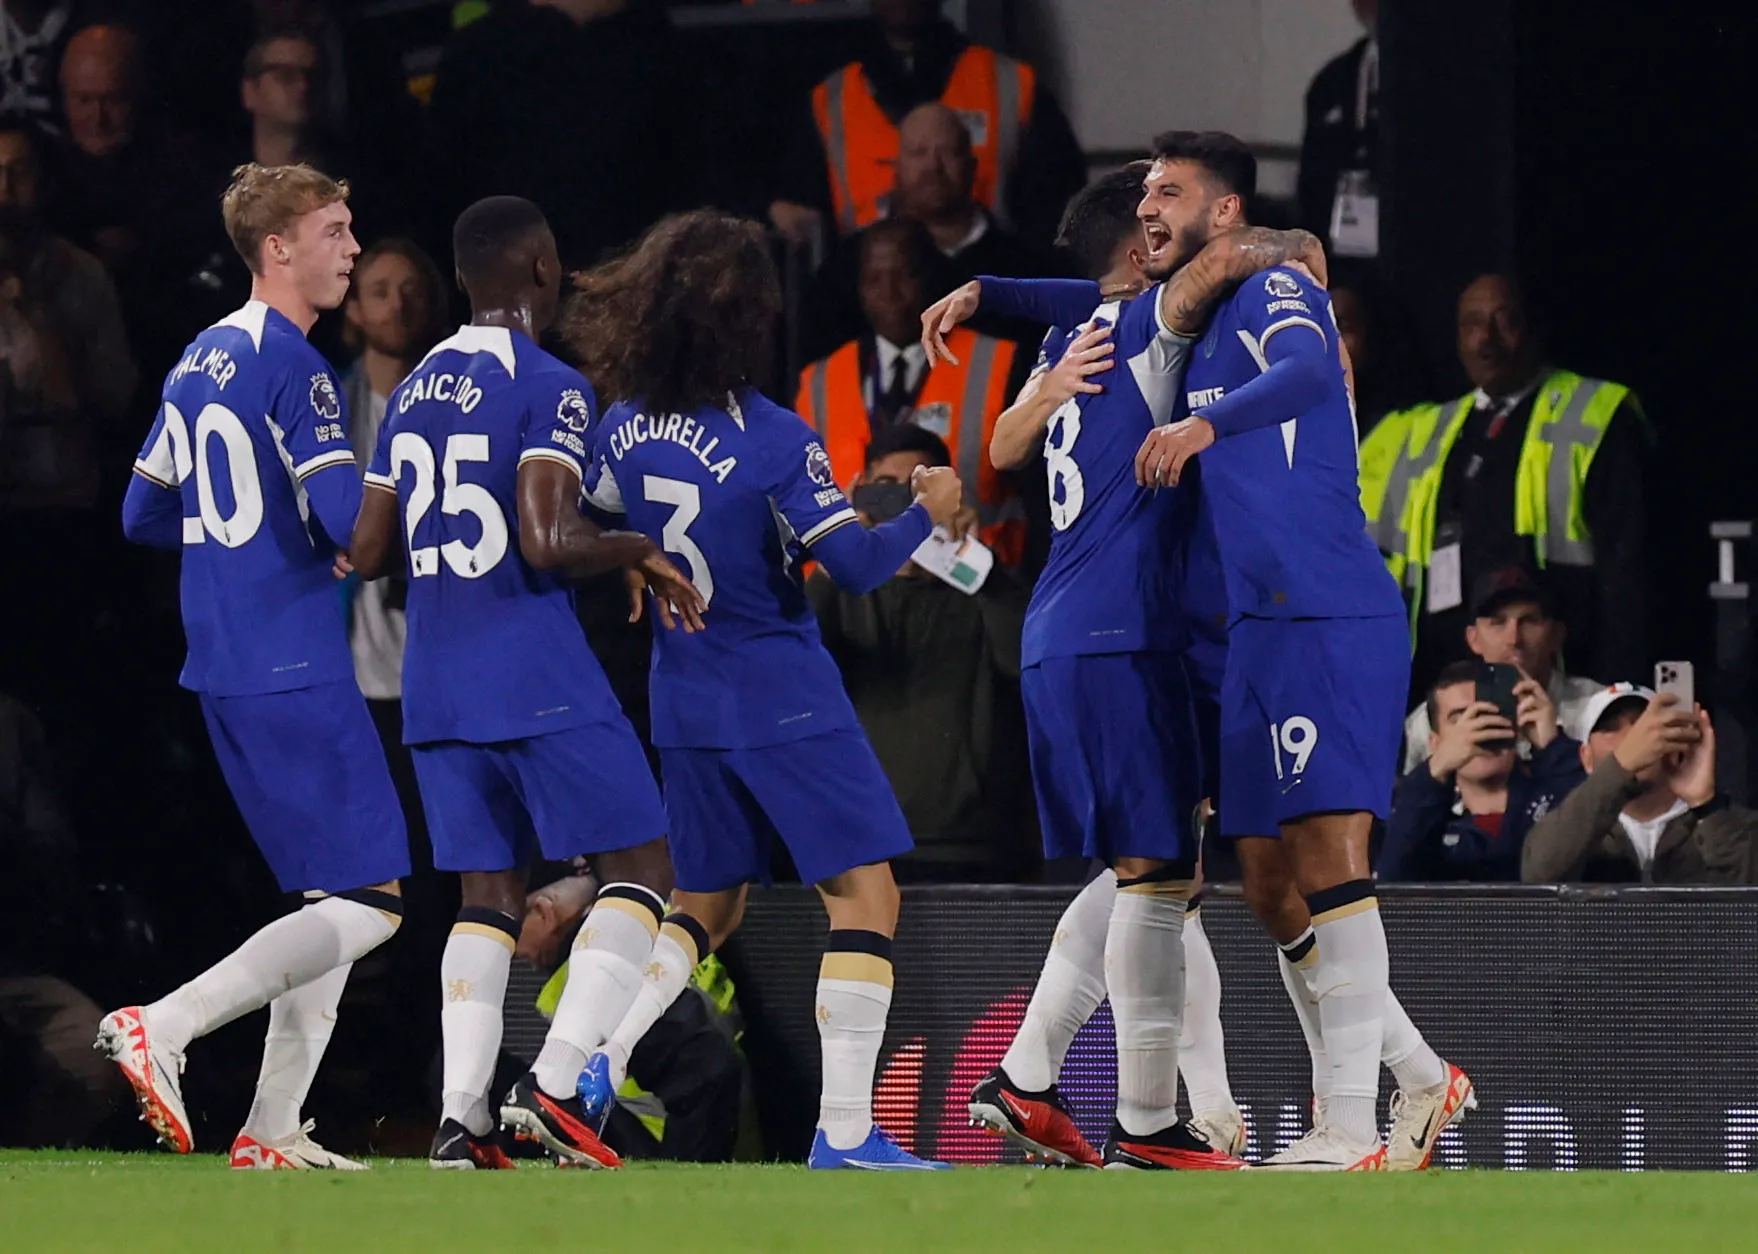 Chelsea's Strategic Pivot: The Quest for Set-Piece Mastery to Revitalize Their Season